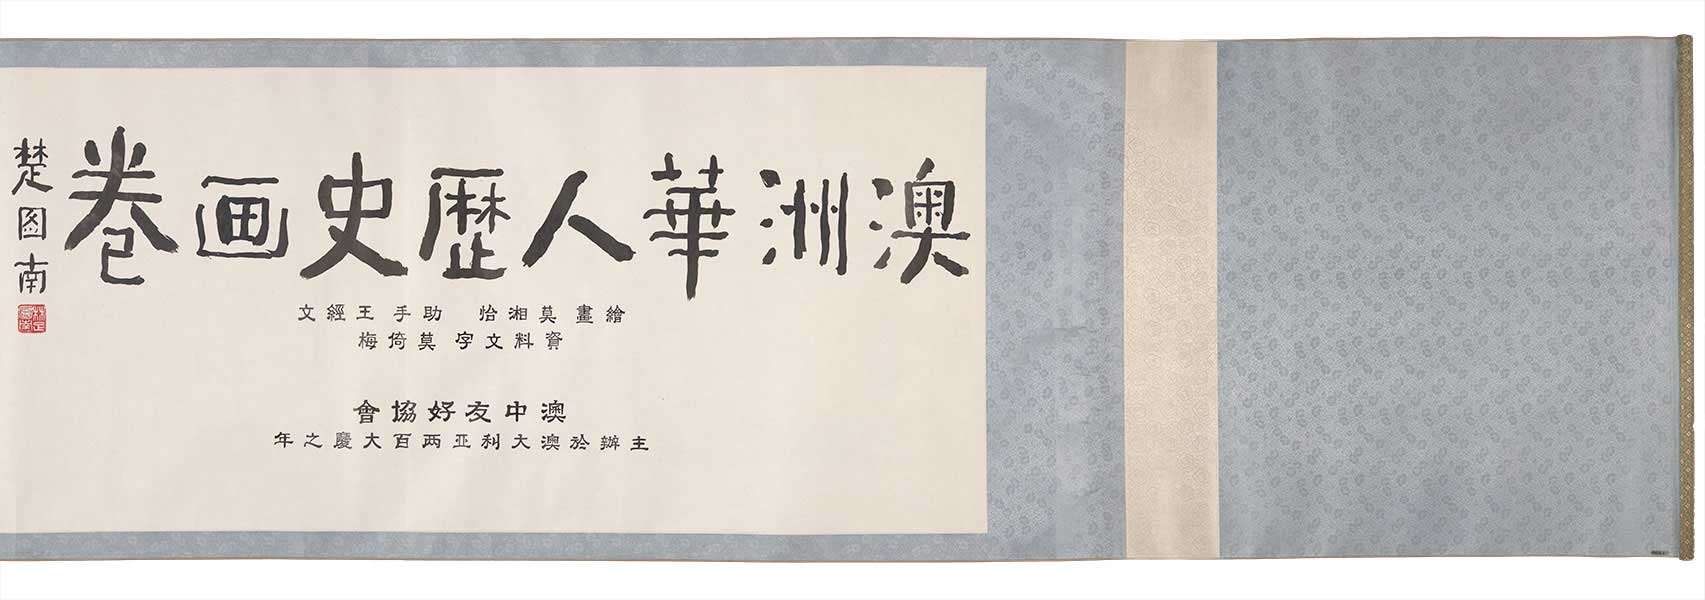 Inscription at the start of the Harvest of Endurance scroll about the history of Chinese in Australia.